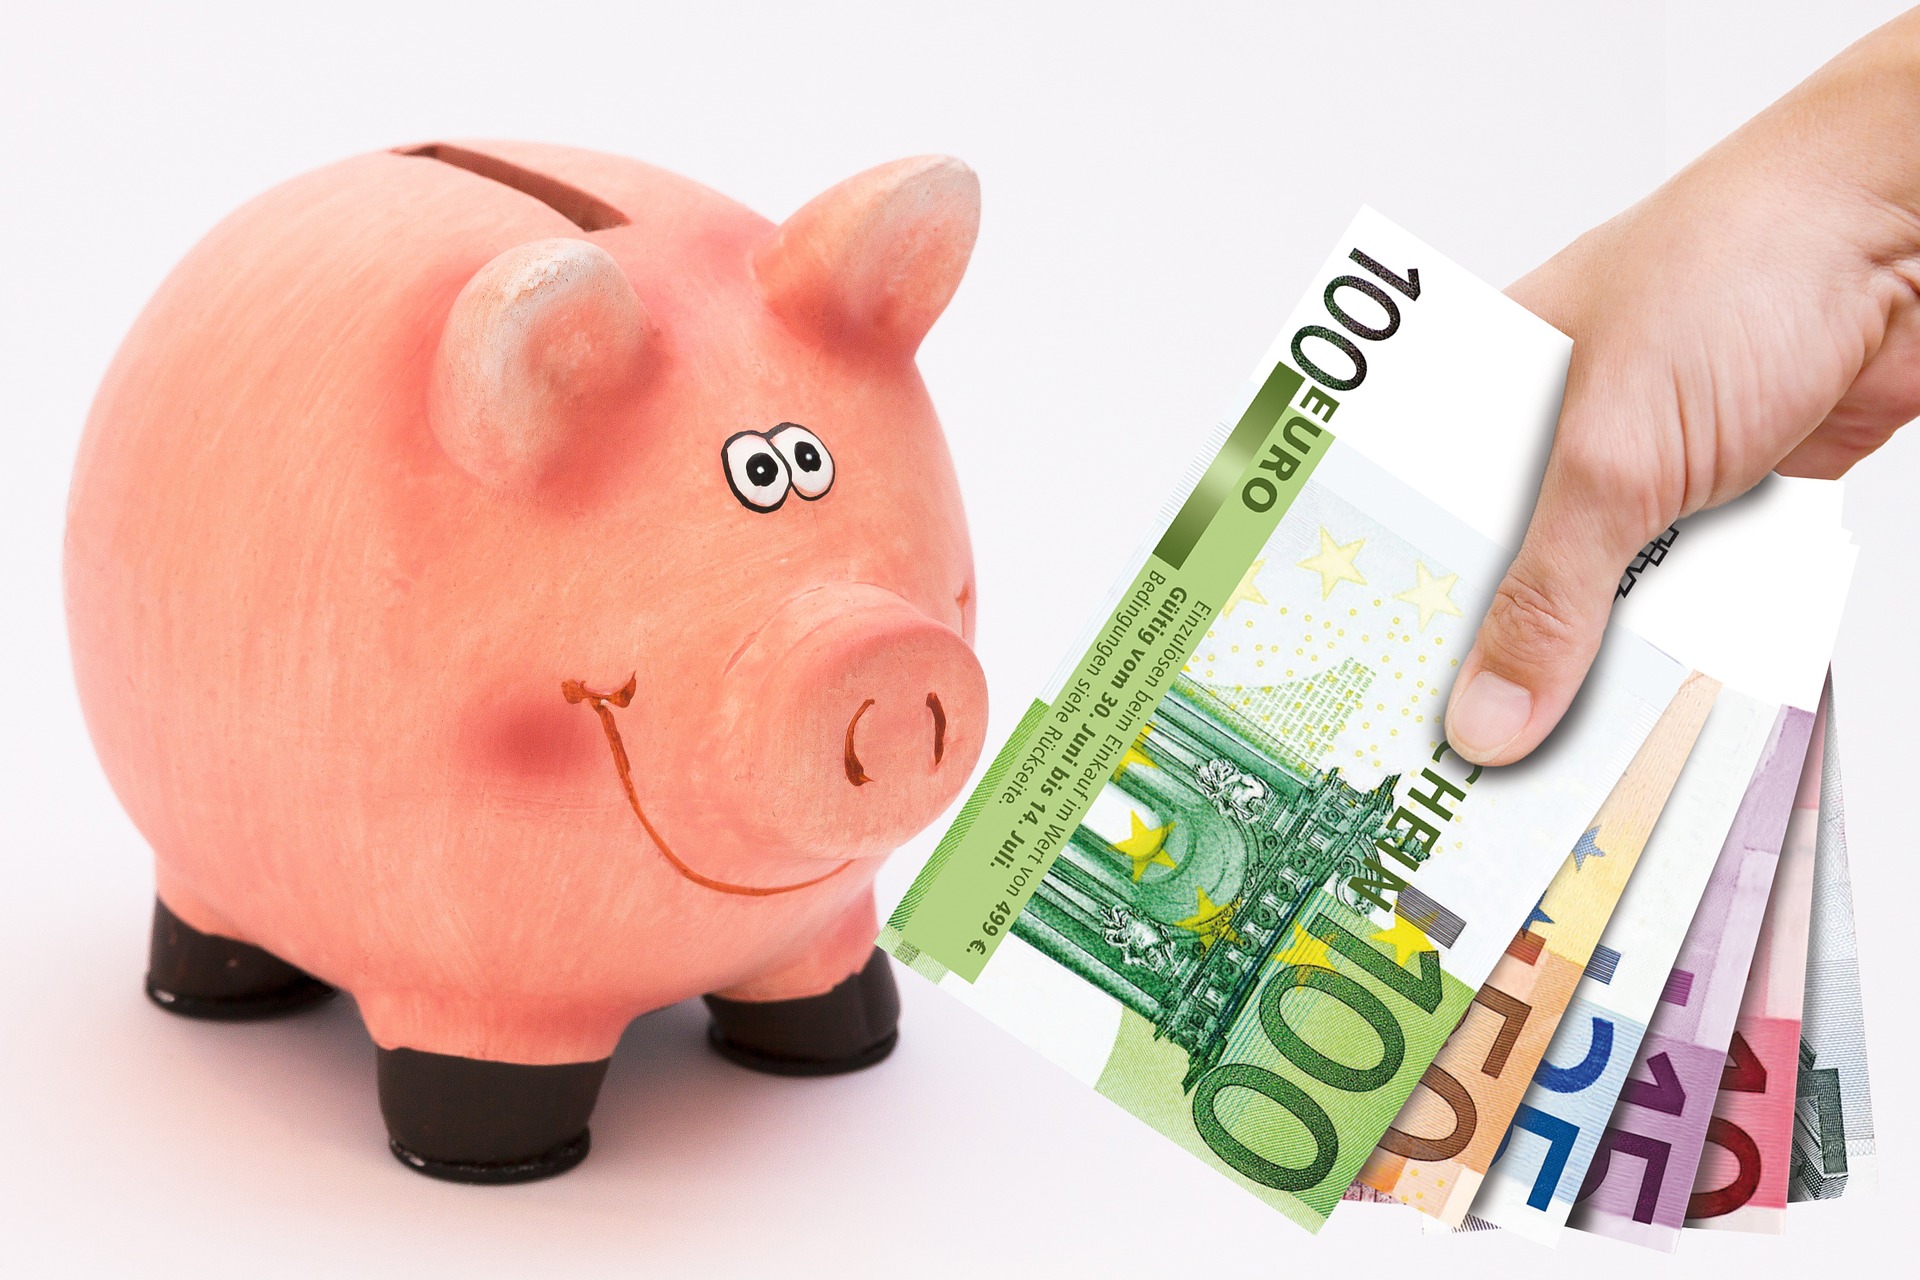 Piggy bank and banknotes symbolize saving money during inspections